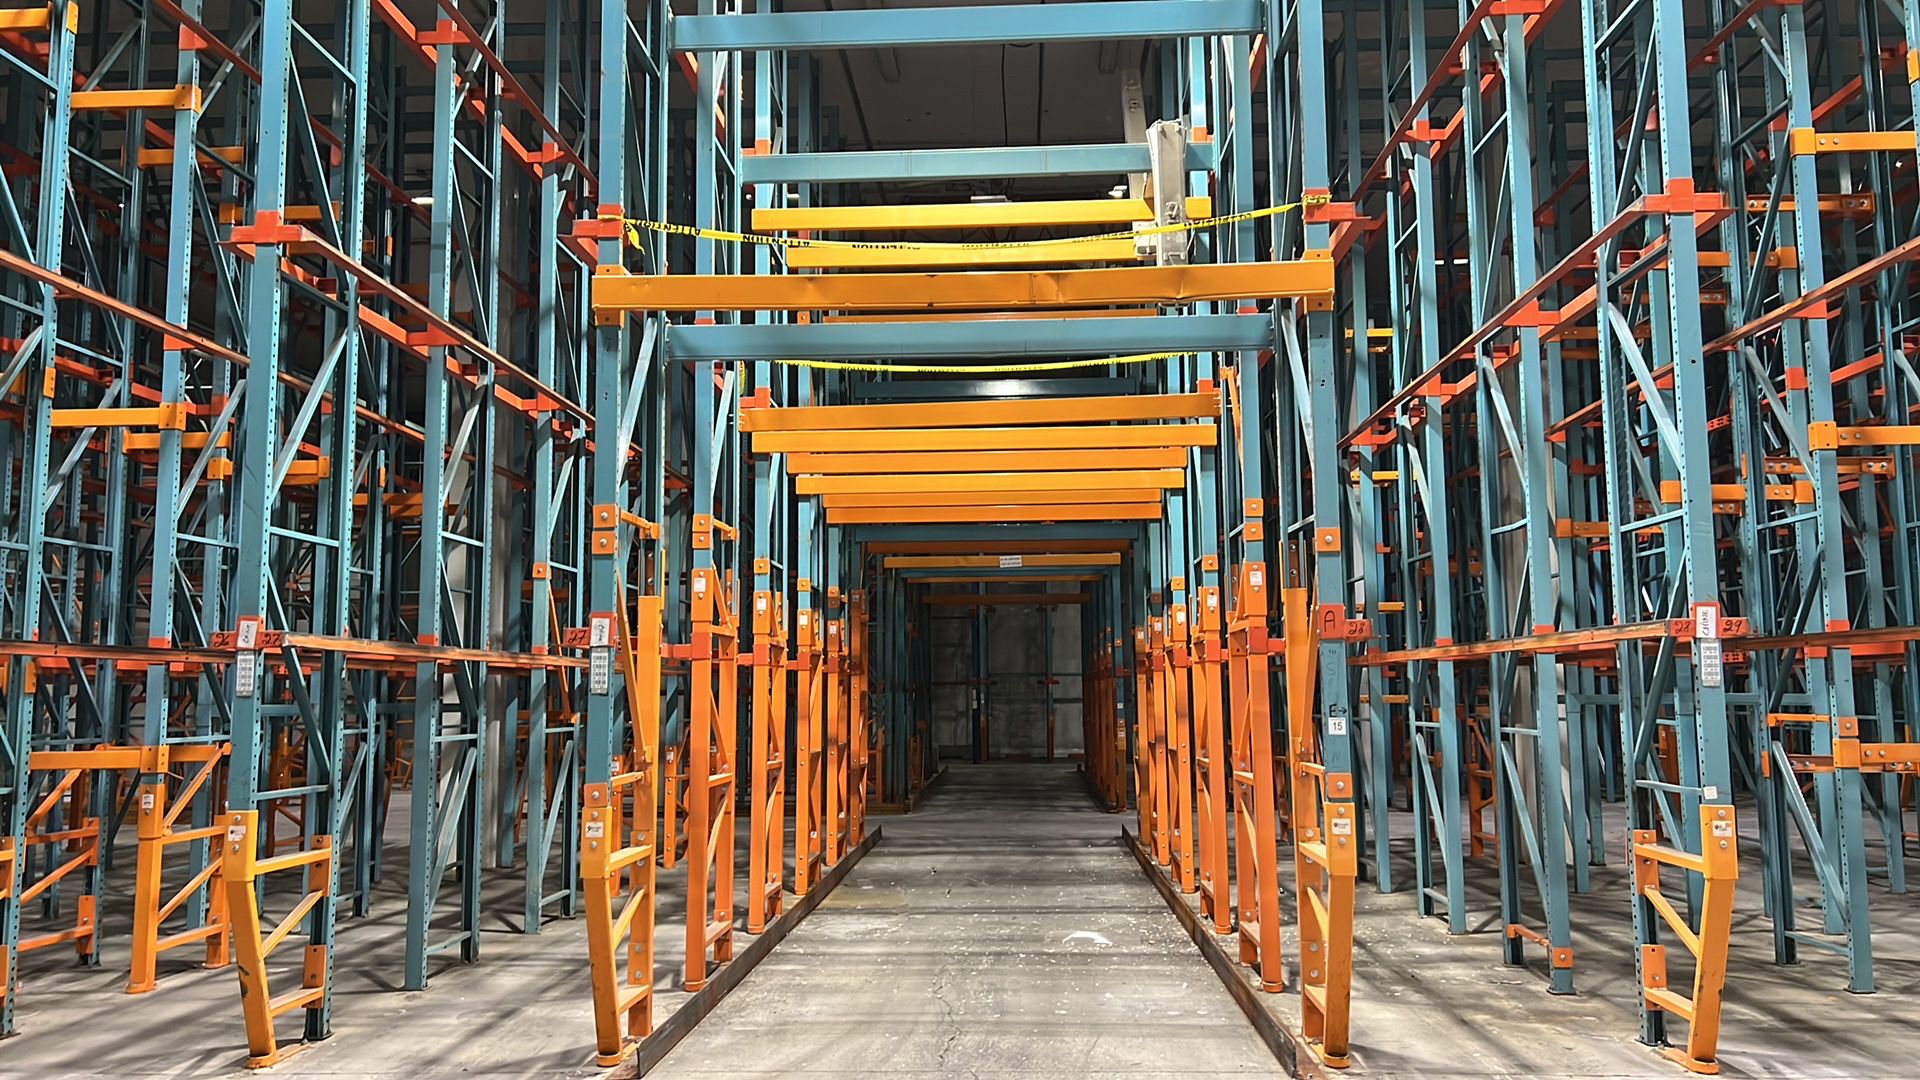 Drive Racking System 36 Rows/1500 Bays, (400) 22/25' Uprights (250) Rail Sections, (500+) Top Beams. - Image 5 of 14